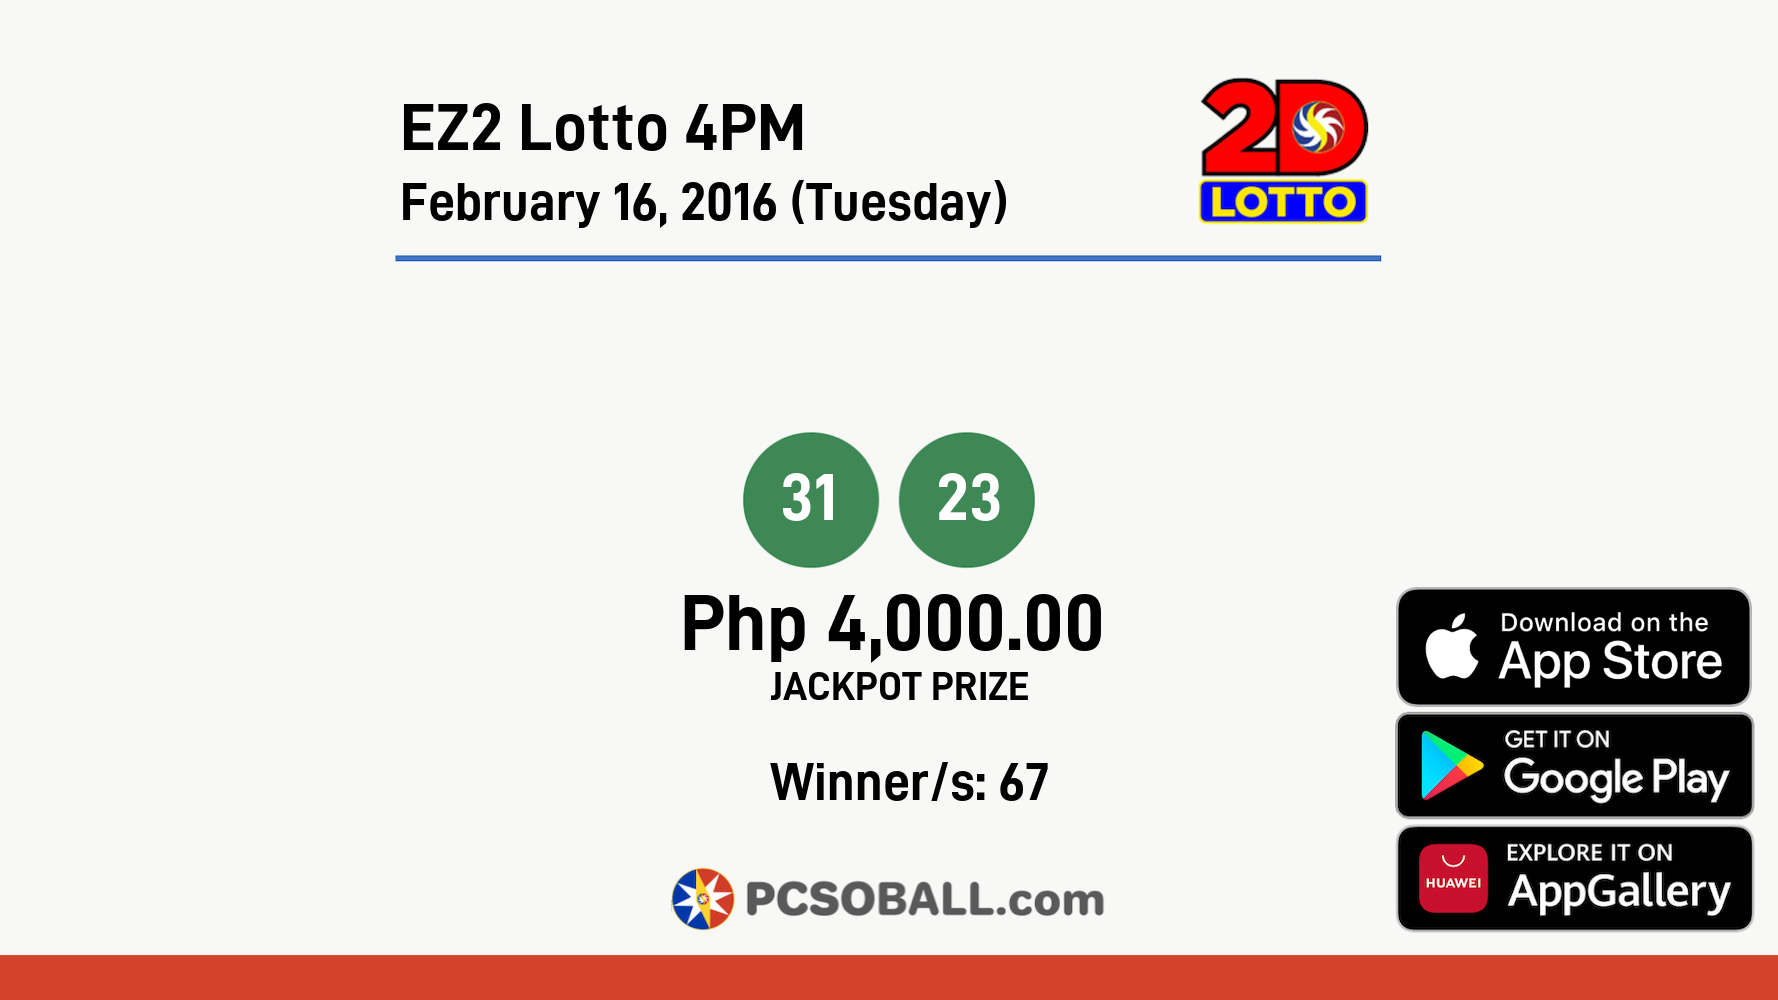 EZ2 Lotto 4PM February 16, 2016 (Tuesday) Result